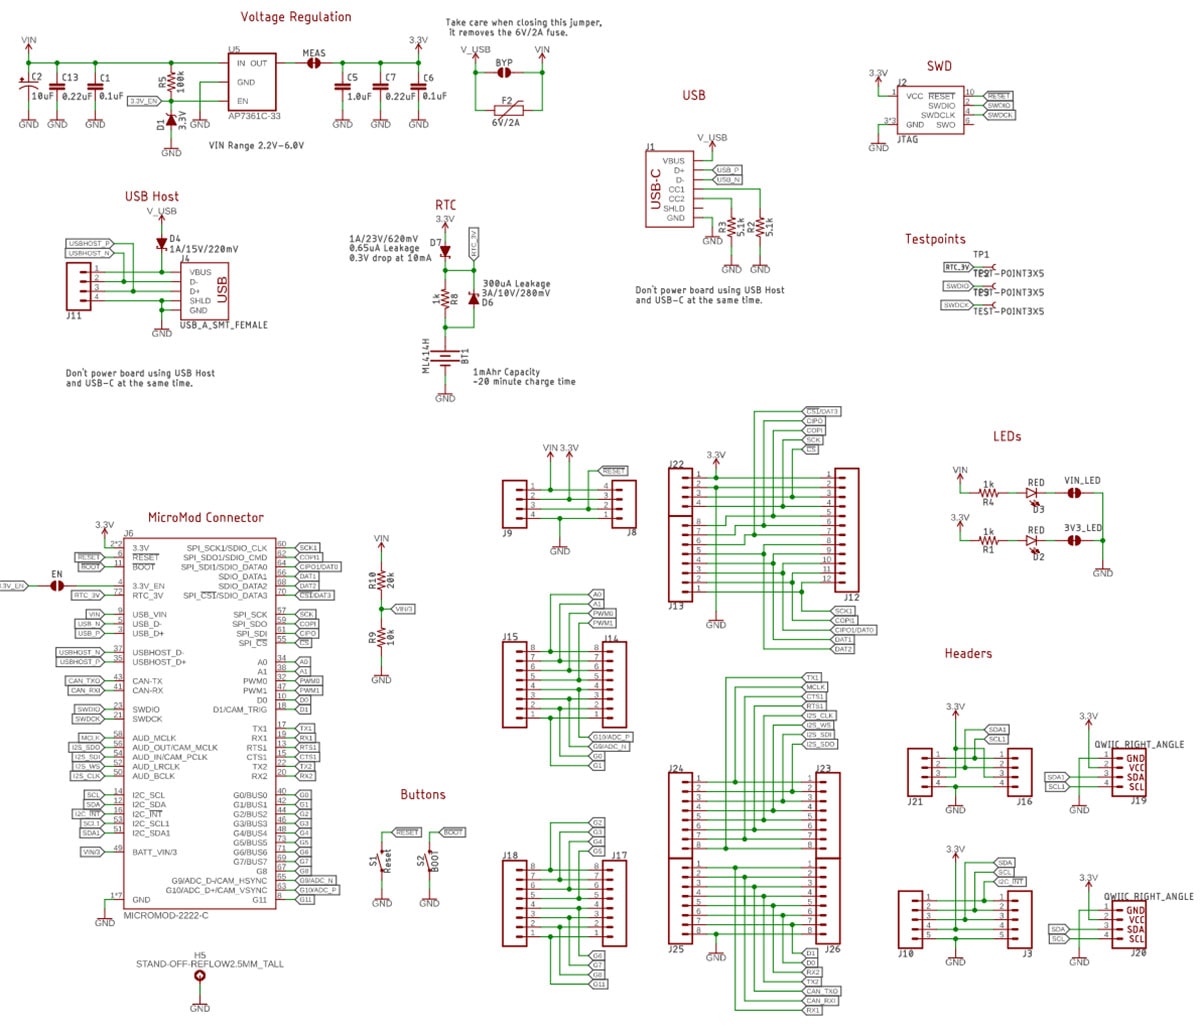 MicroMod ATP Carrier Schematic